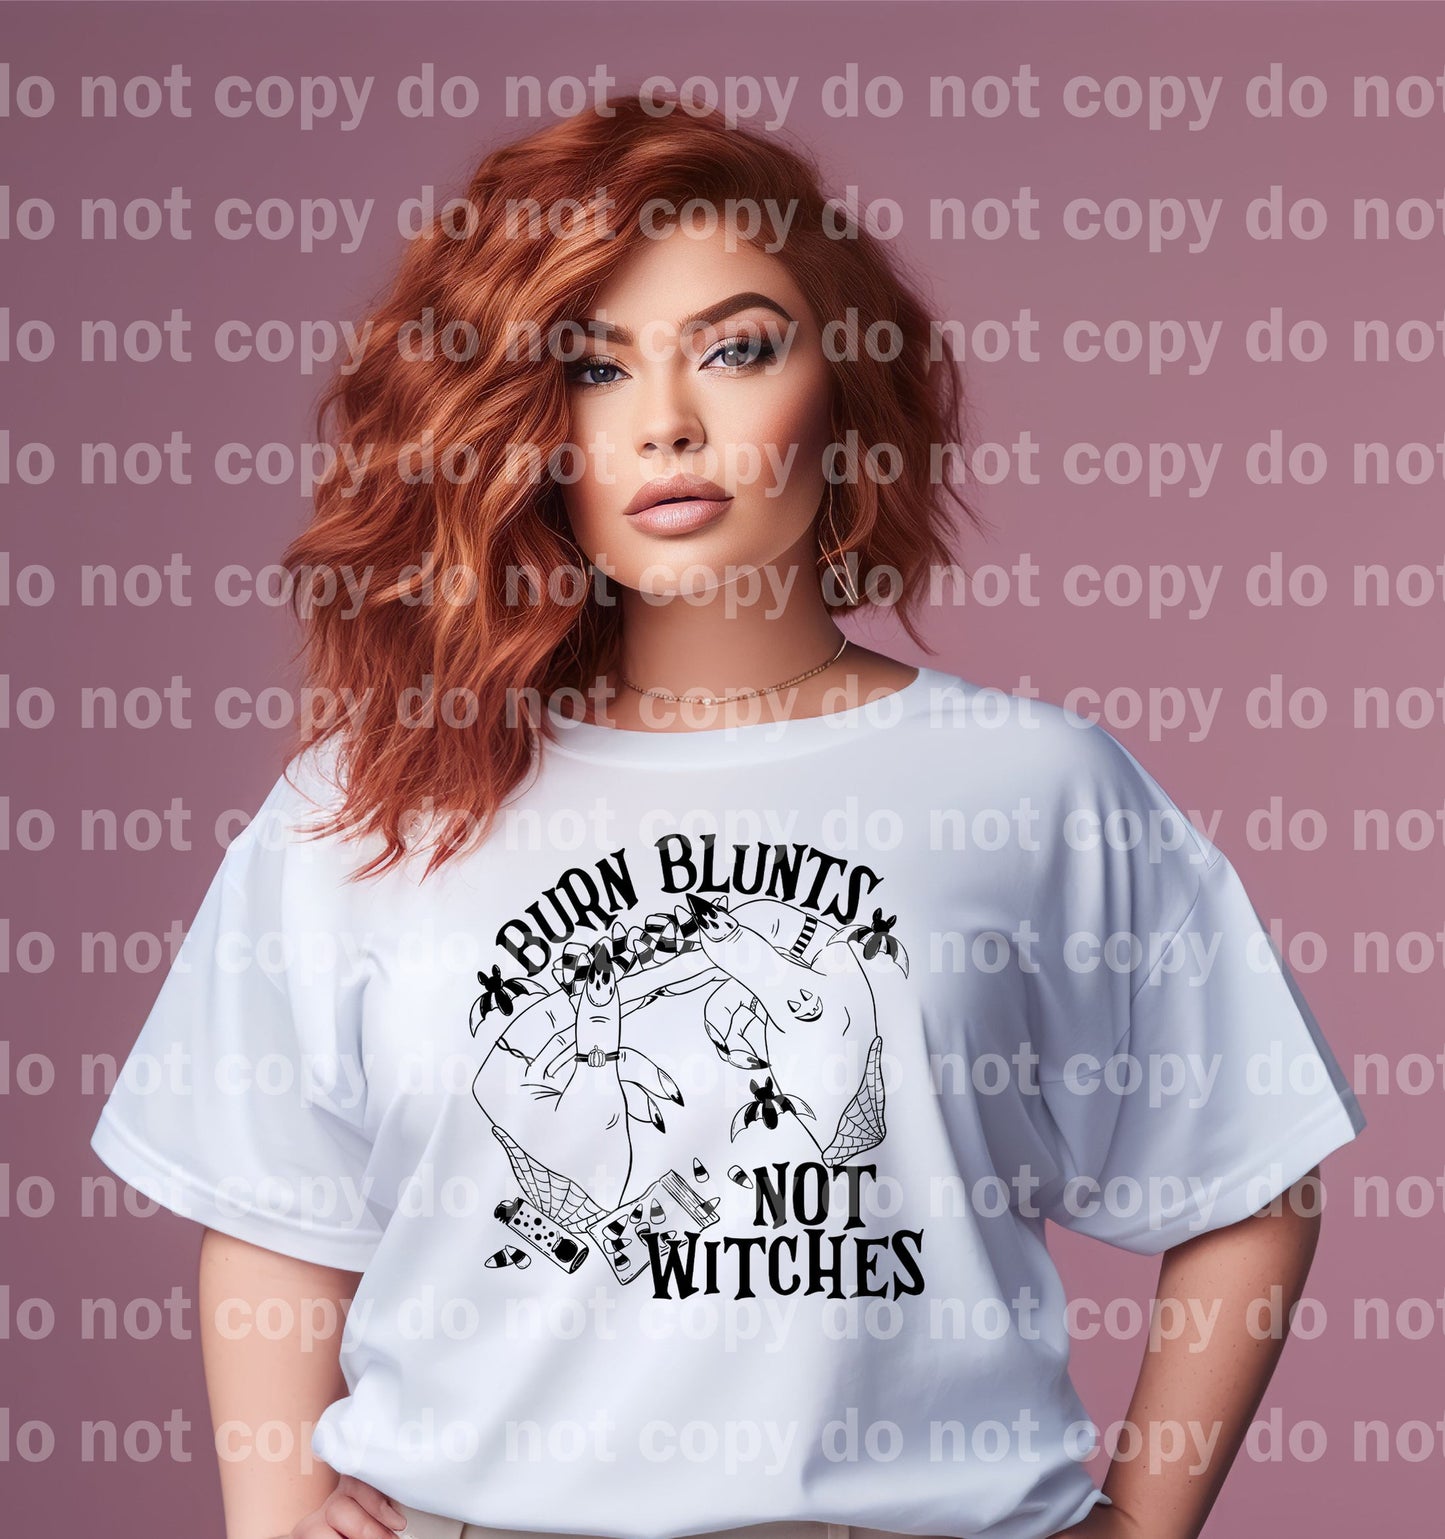 Burn Blunts Not Witches with Pocket Option Dream Print or Sublimation Print